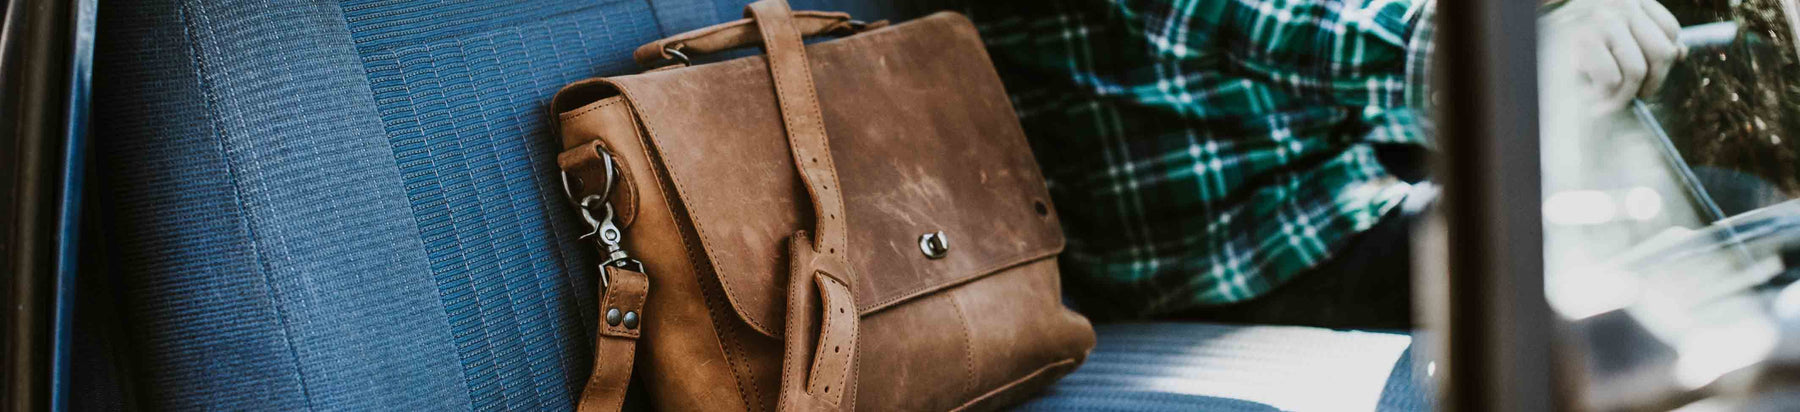 Leather Messenger Bags